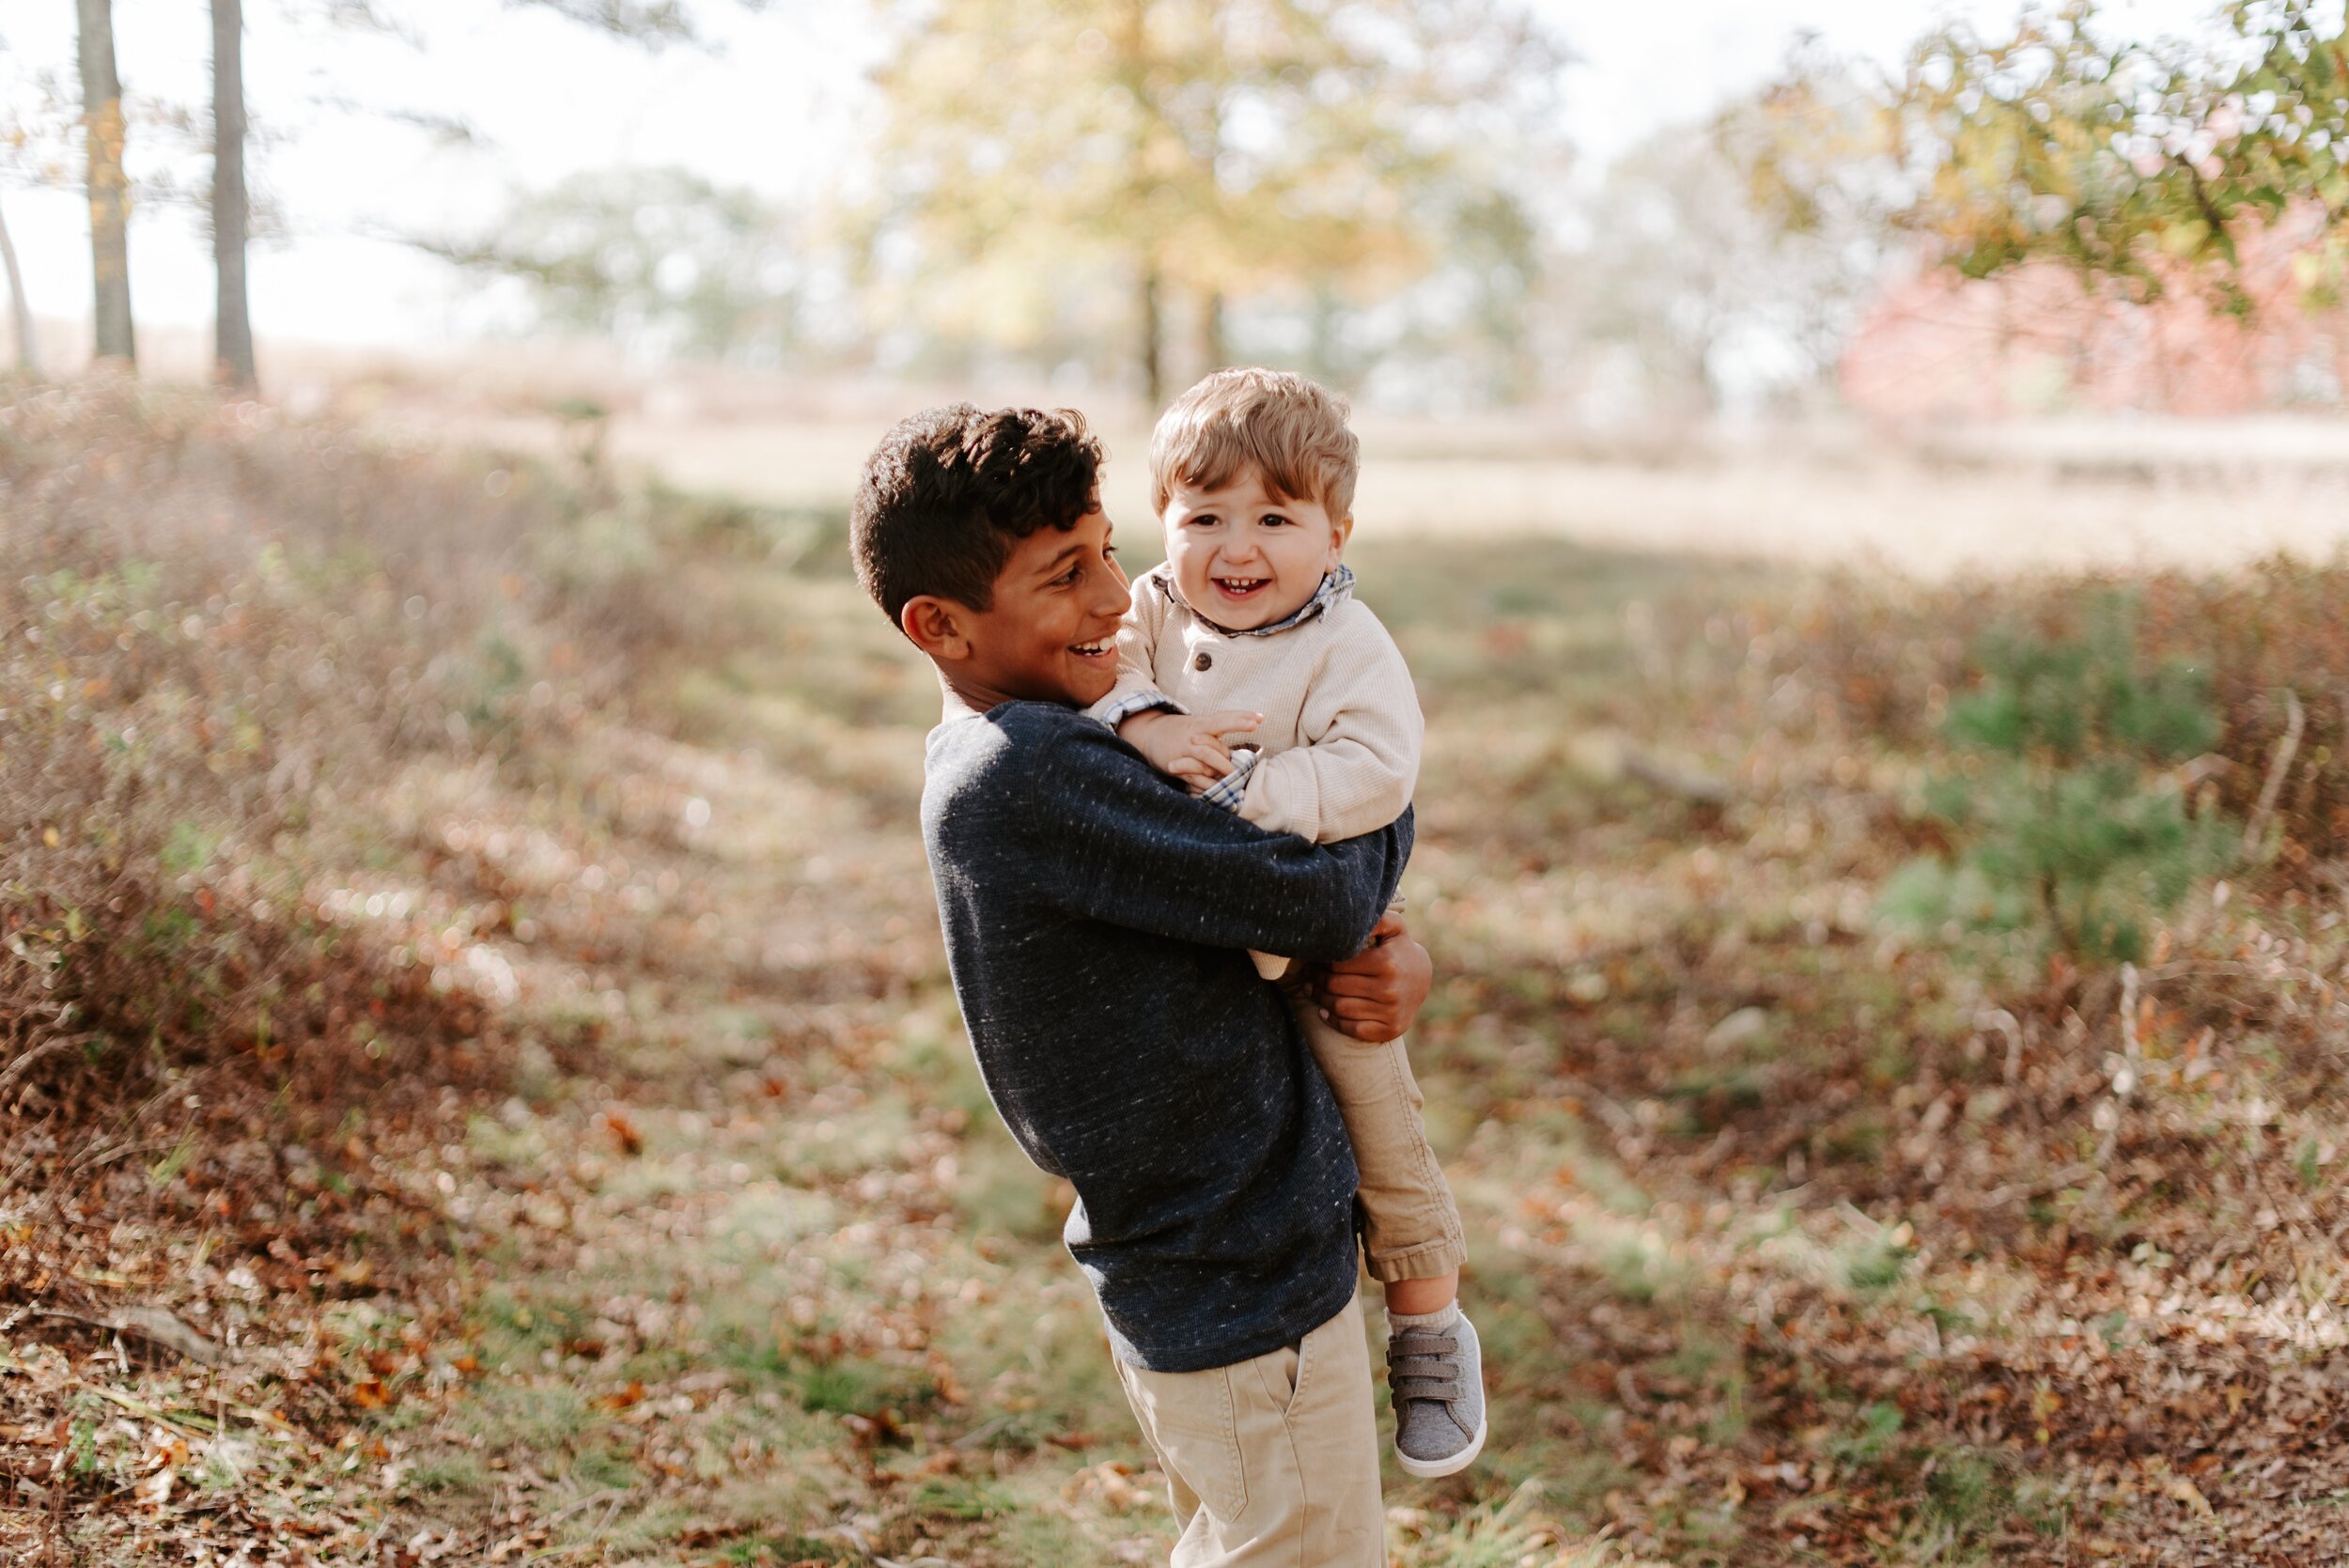 Southern Connecticut Lifestyle Family Photographer Fall Outdoors Autumn Photos Brothers.jpg